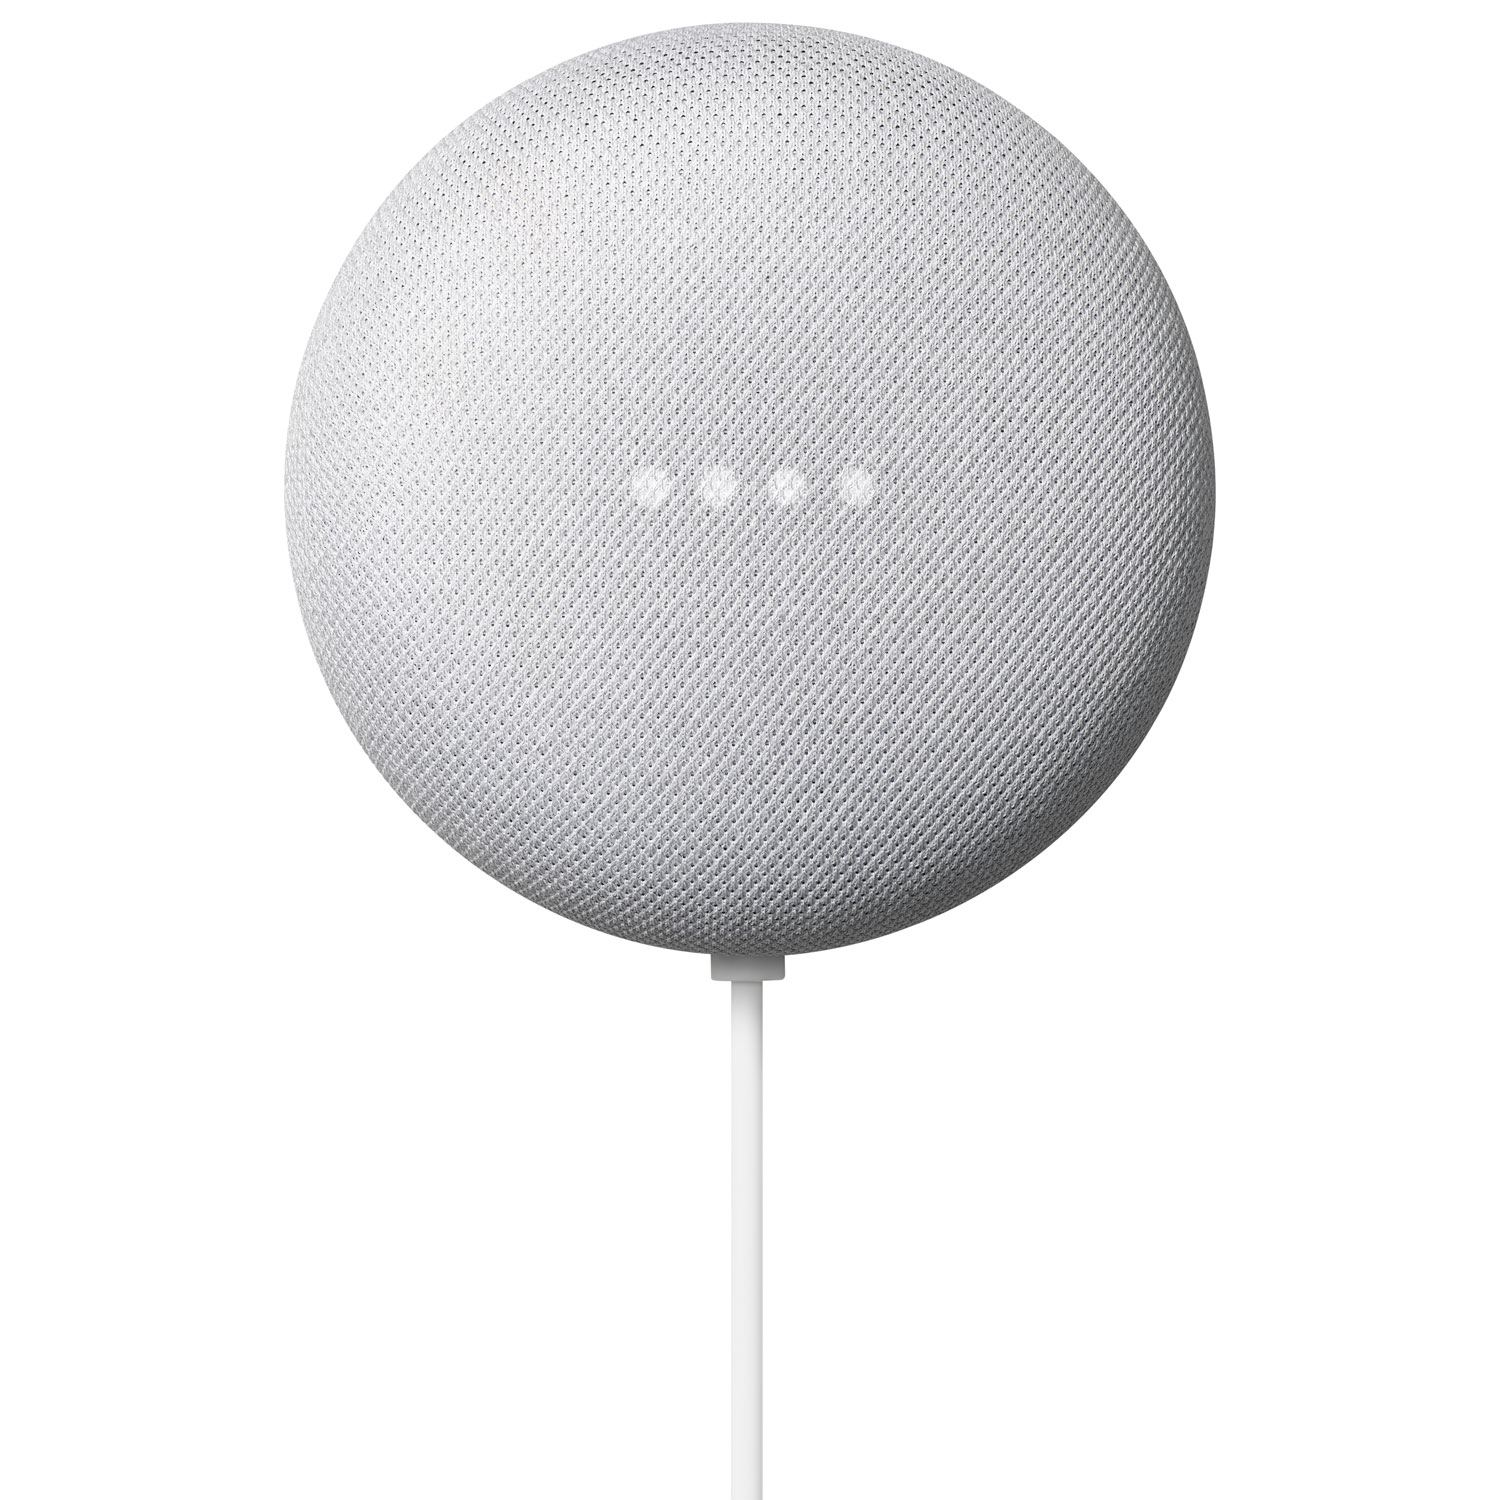 Best Buy: Nest Mini (2nd Generation) with Google Assistant Sky GA01140-US